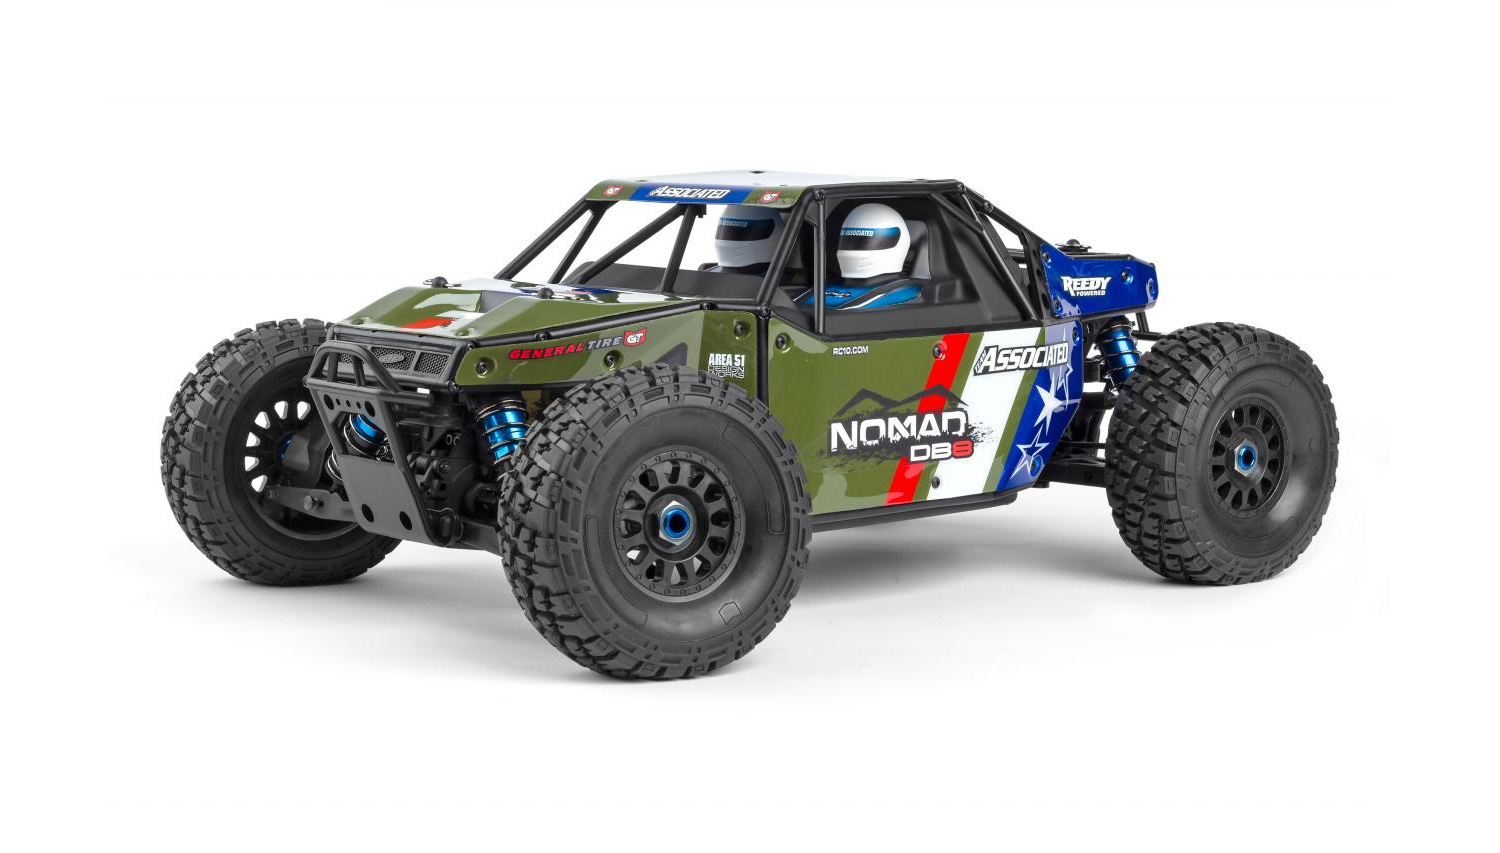 Limited Edition Nomad DB8 Ready-to-Run